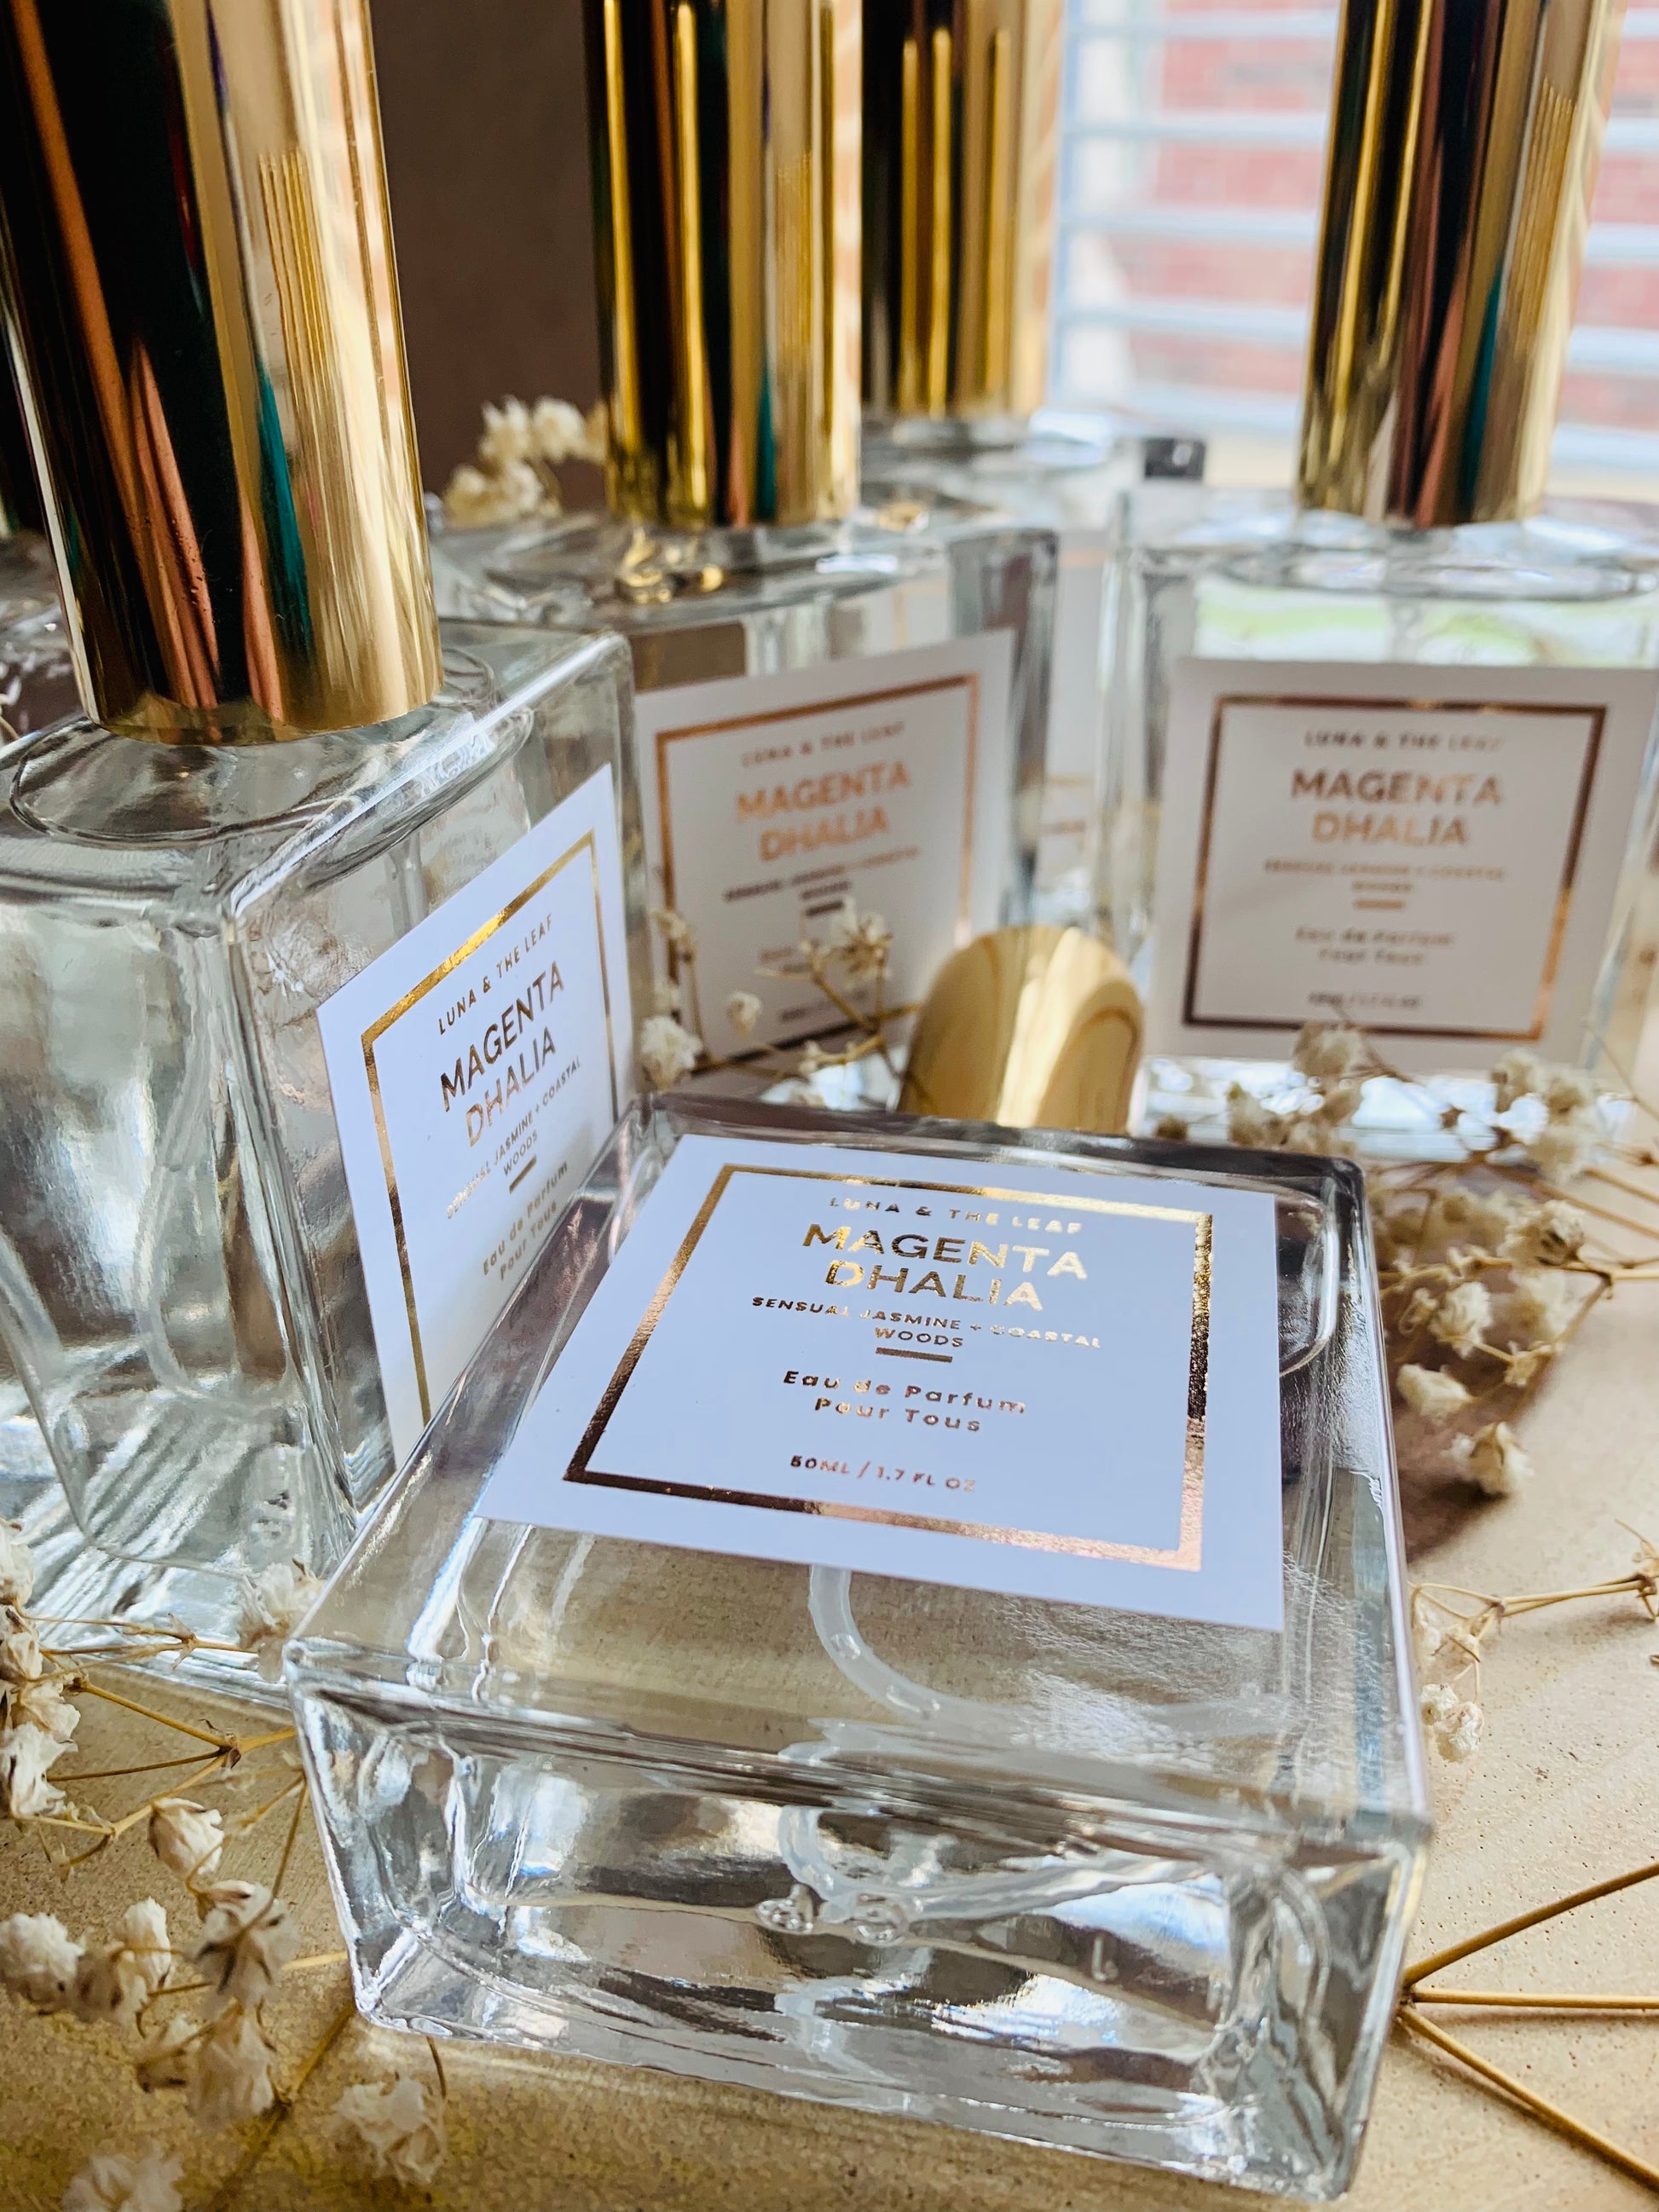 5 glass parfum bottles with gold caps are on a light brown wooden surface with a window in the background that has open blinds. The bottle in the front is lying on its back. There are small flowers with skinny wooden stems surrounding the glass parfum bottles. The bottles are labeled with a rose gold trim, the label reads Luna & The Leaf, Magenta Dhalia, sensual jasmine + coastal woods, eau de parfum pour tous, 50 ml/ 1.7 fl oz.